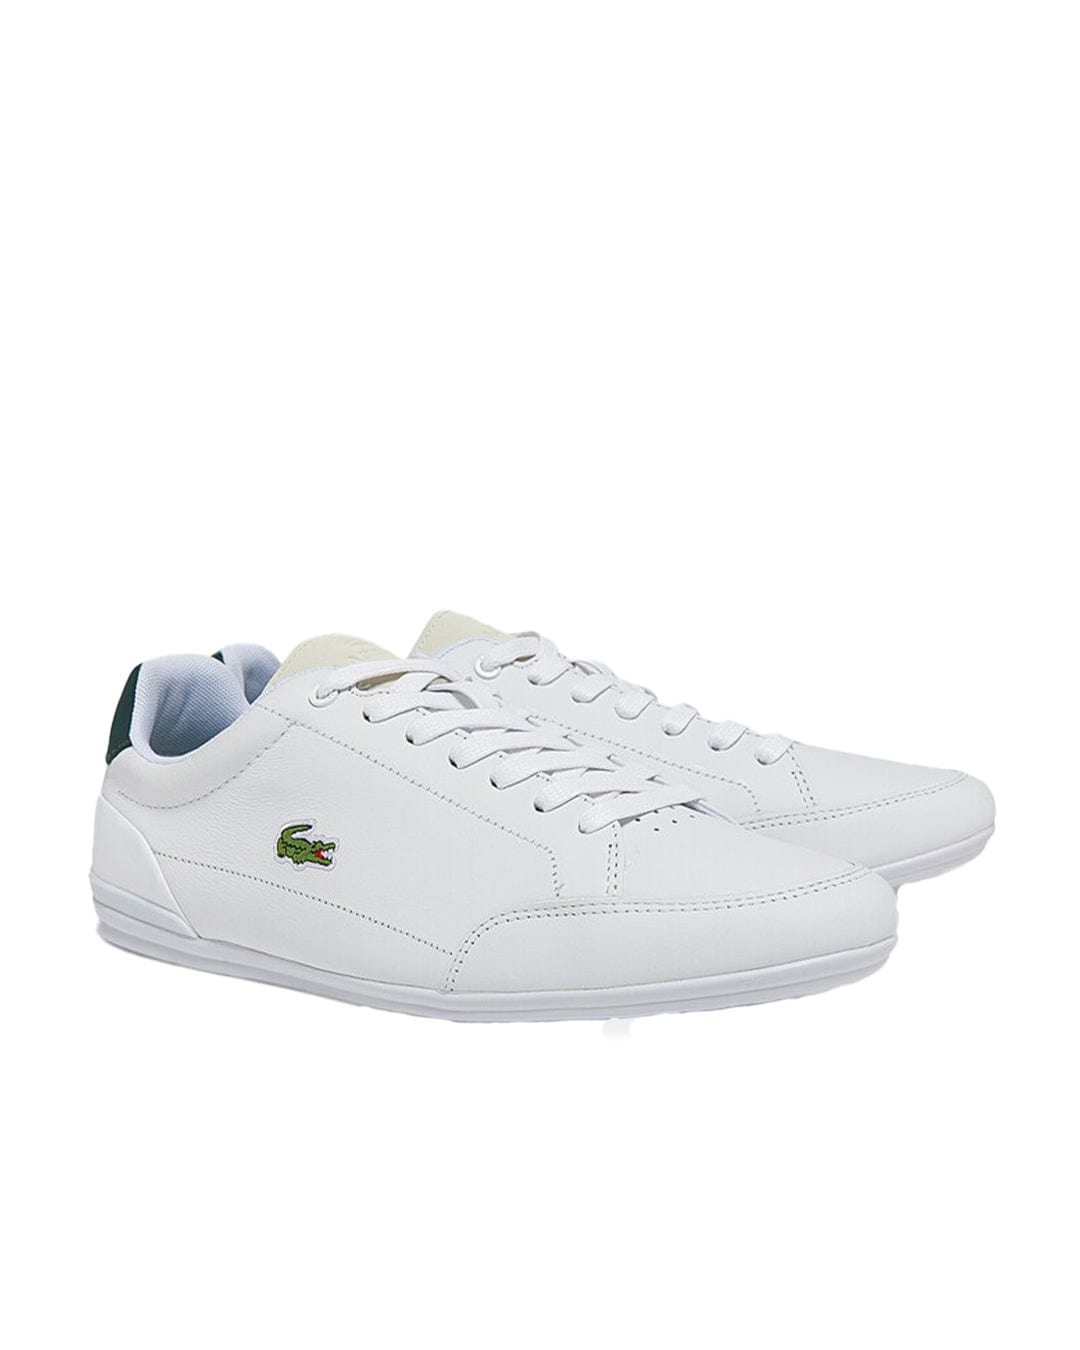 Lacoste Shoes Lacoste Chaymon White And Green Sneakers